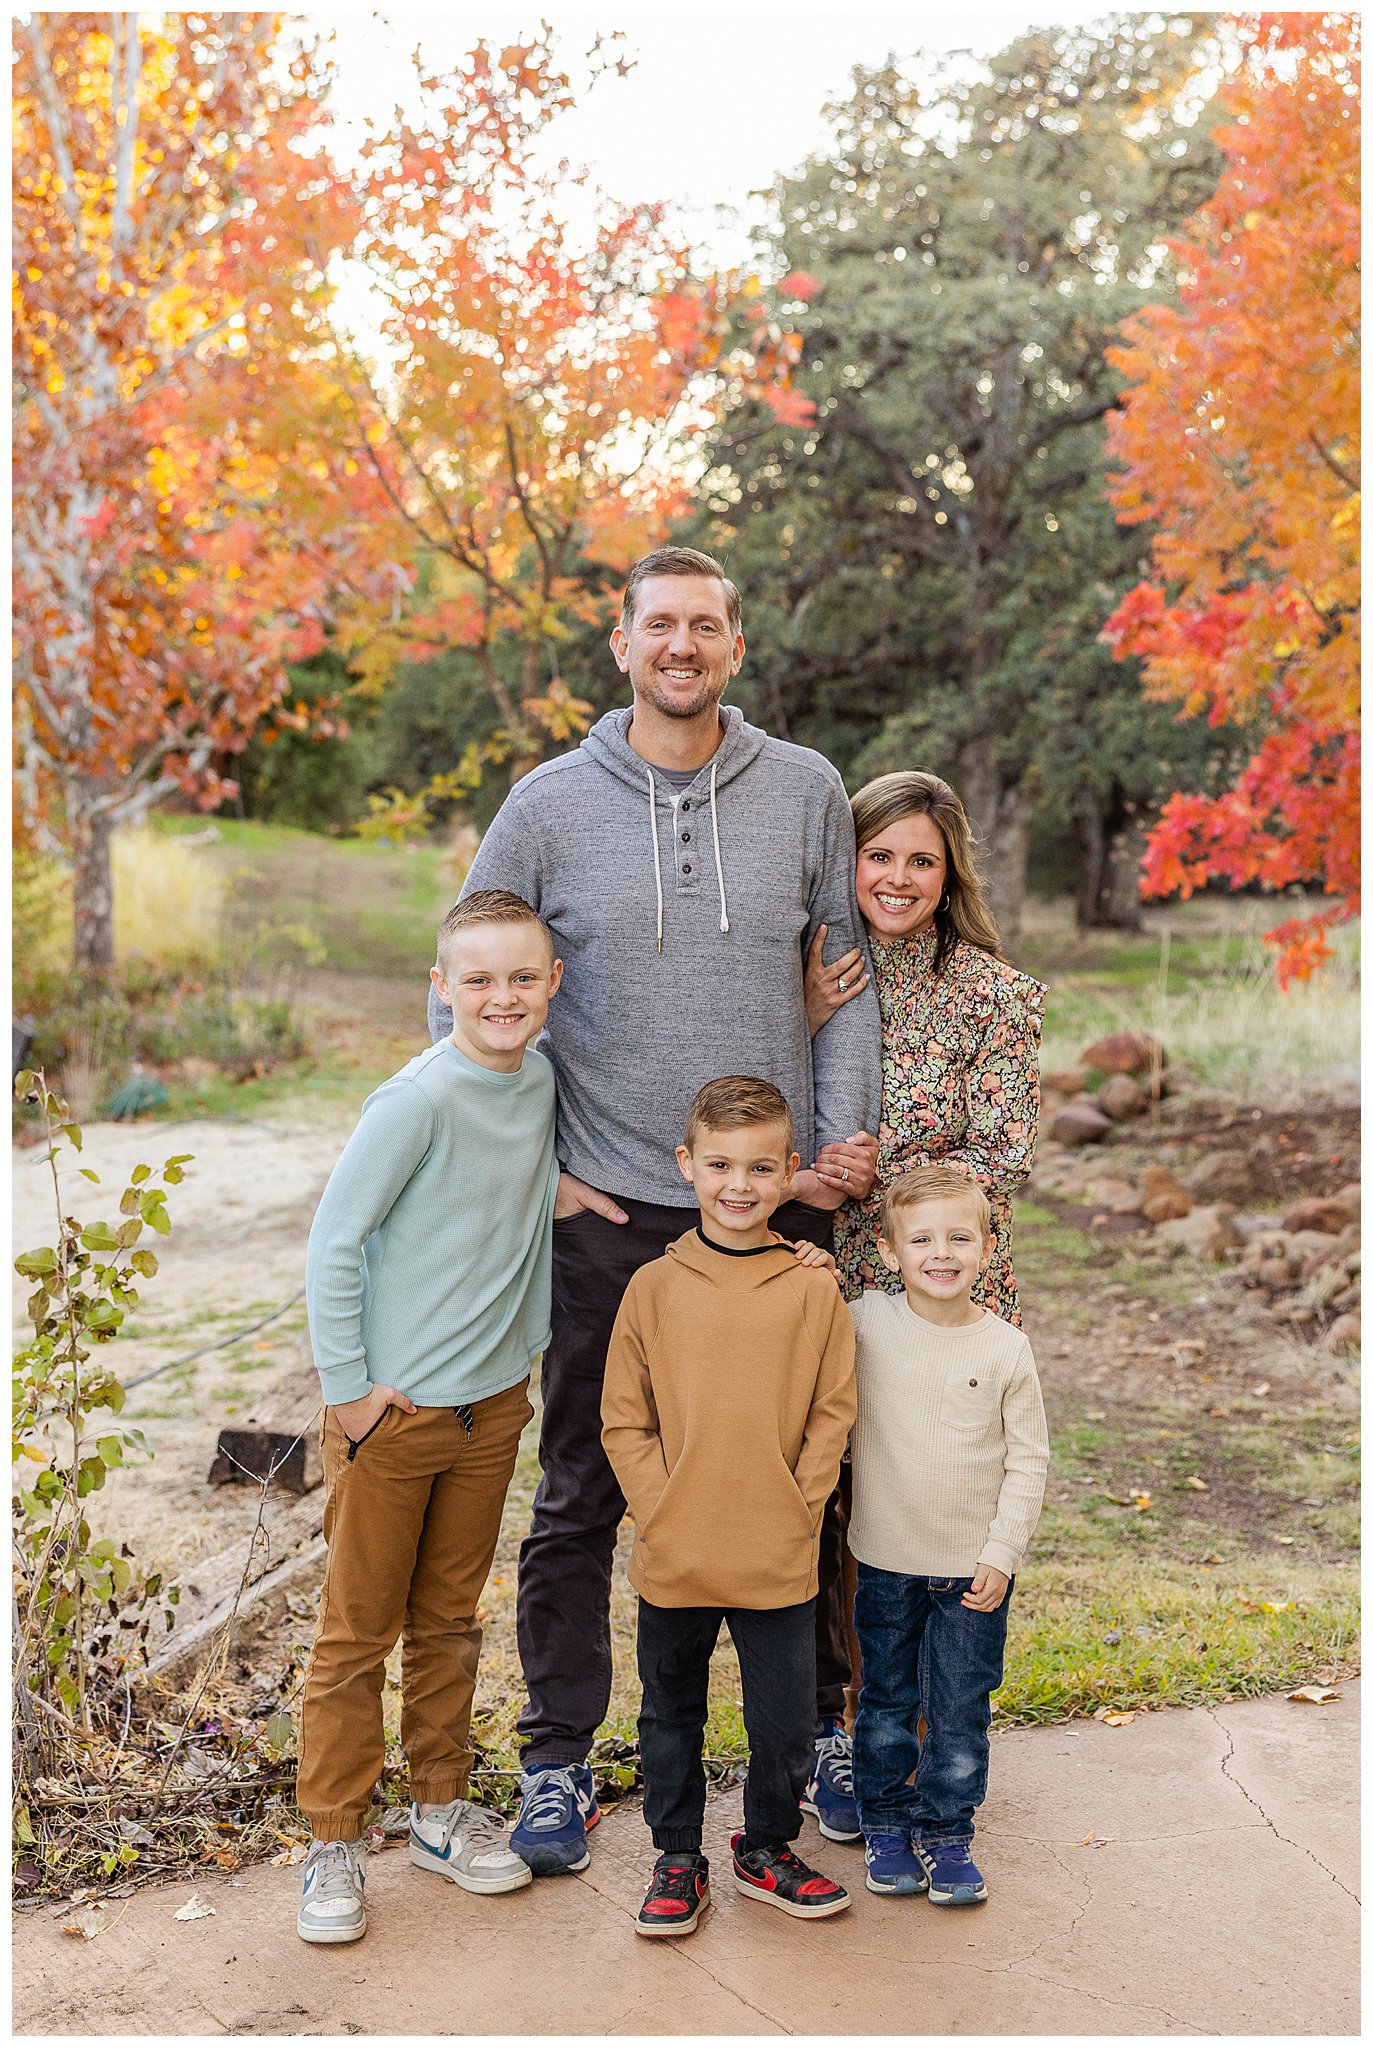 Fall Mini Sessions at White Ranch Events Red Maple Tree | Fall Mini Sessions